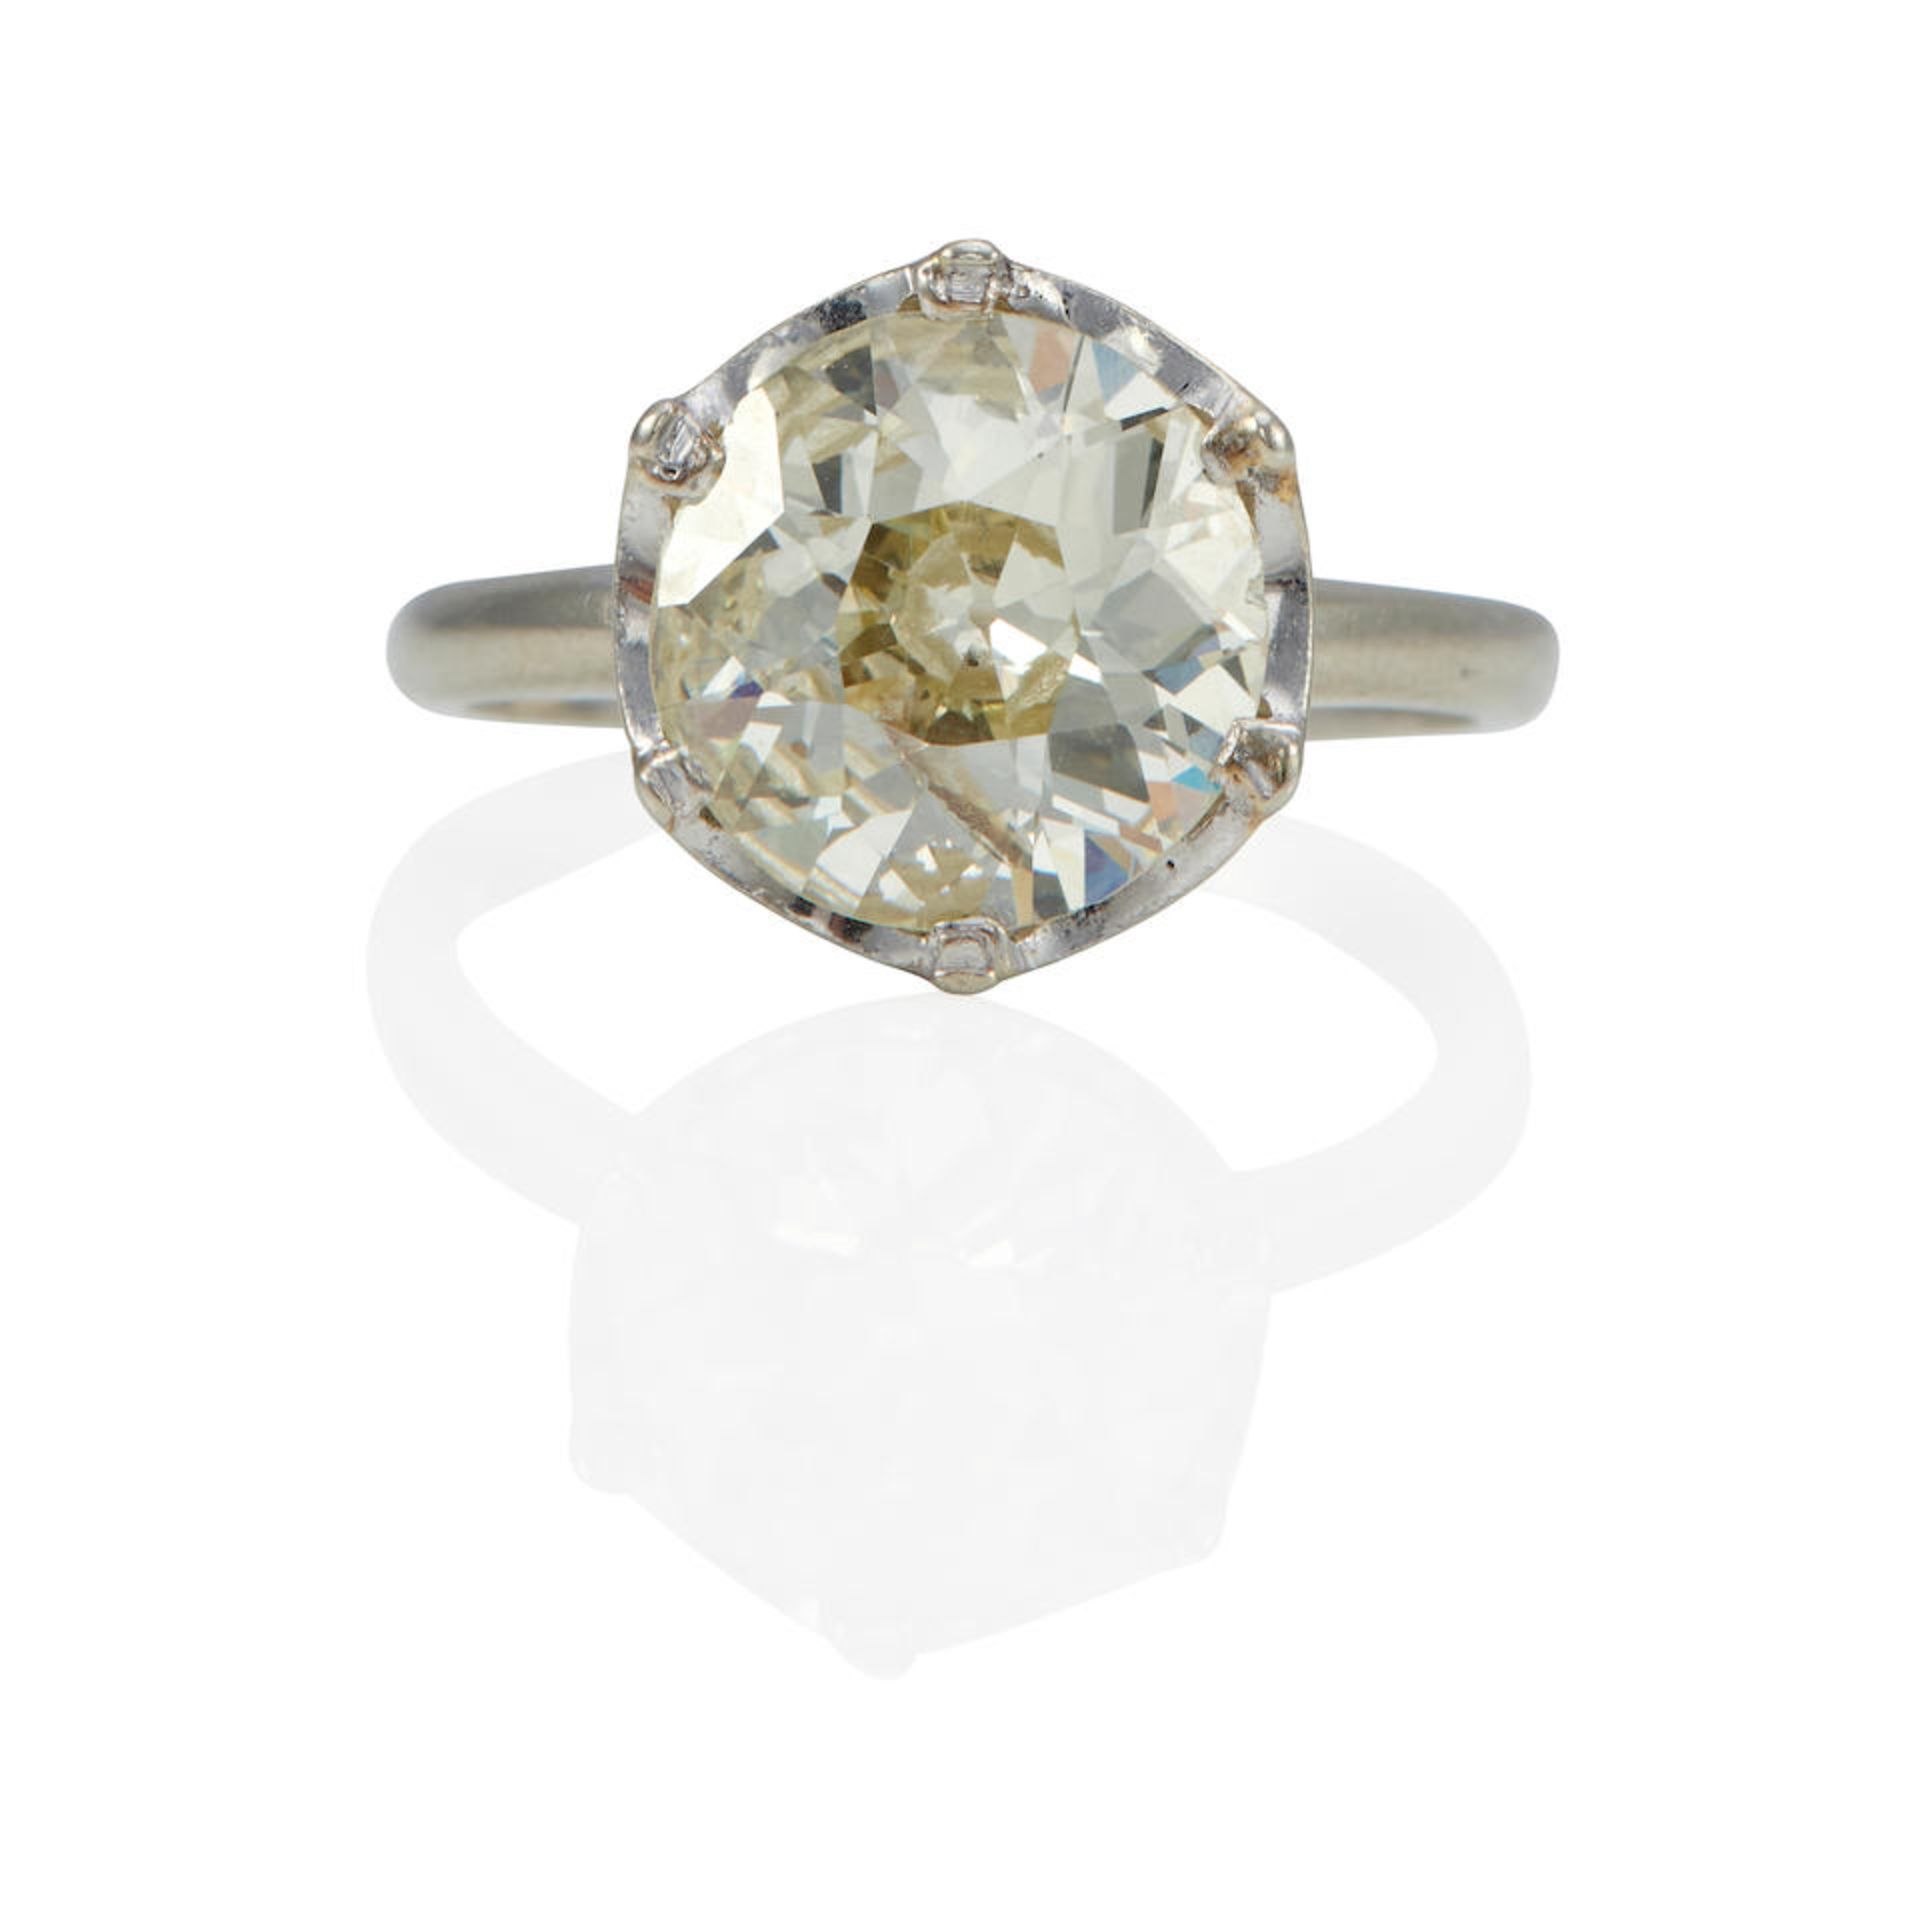 A WHITE GOLD DIAMOND SOLITAIRE RING